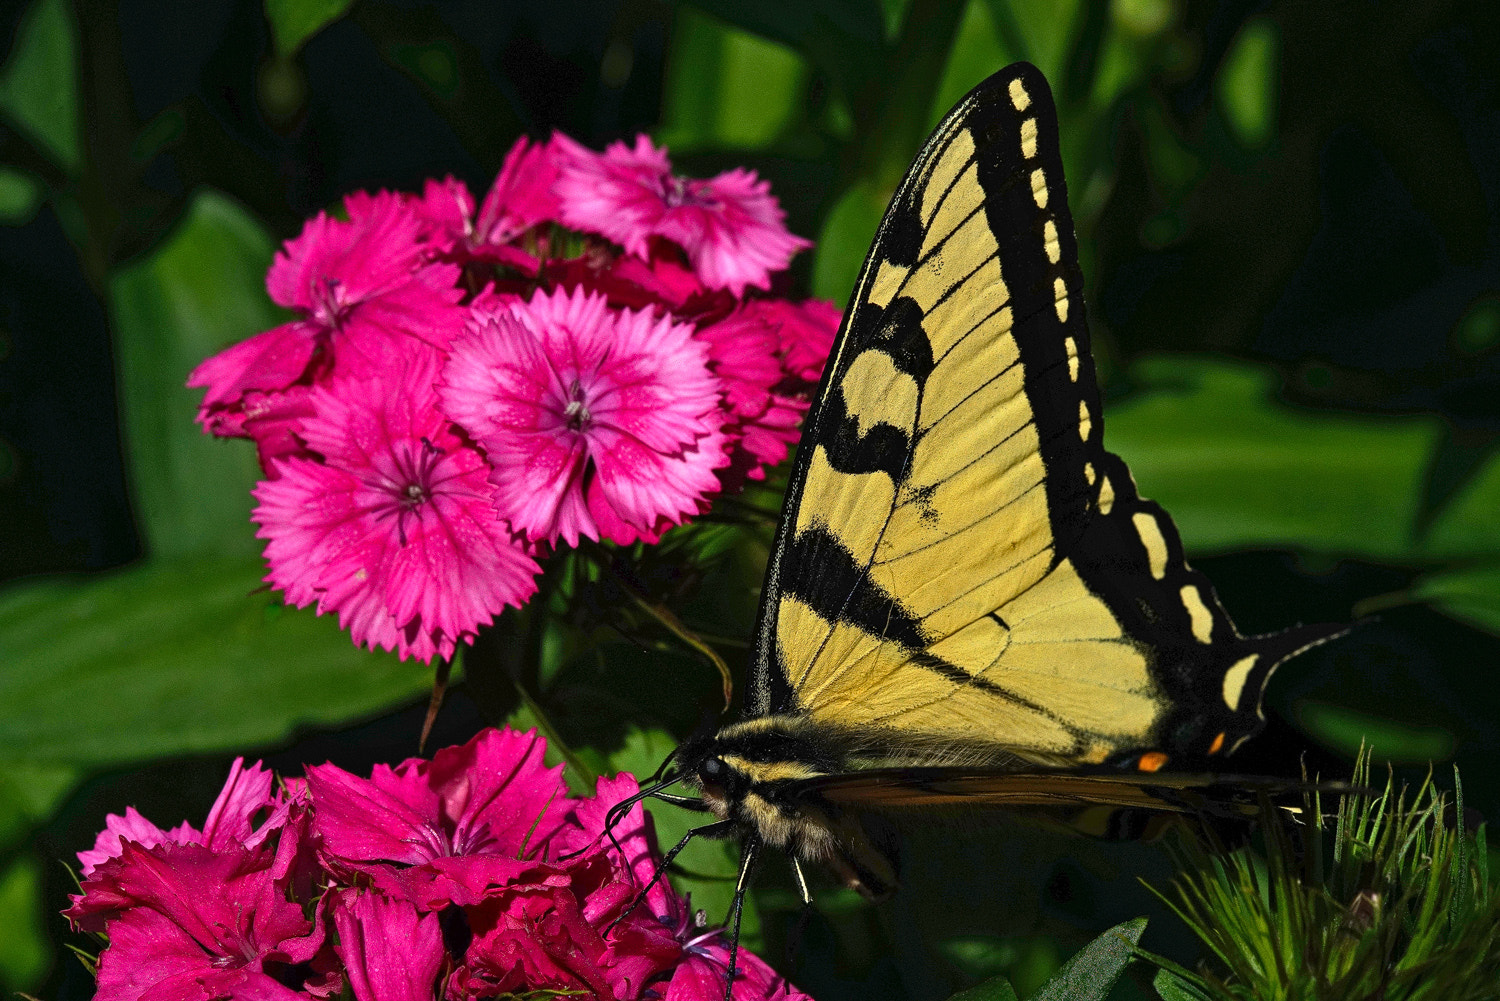 100mm F2.8 SSM sample photo. Swallowtail and sweet william photography